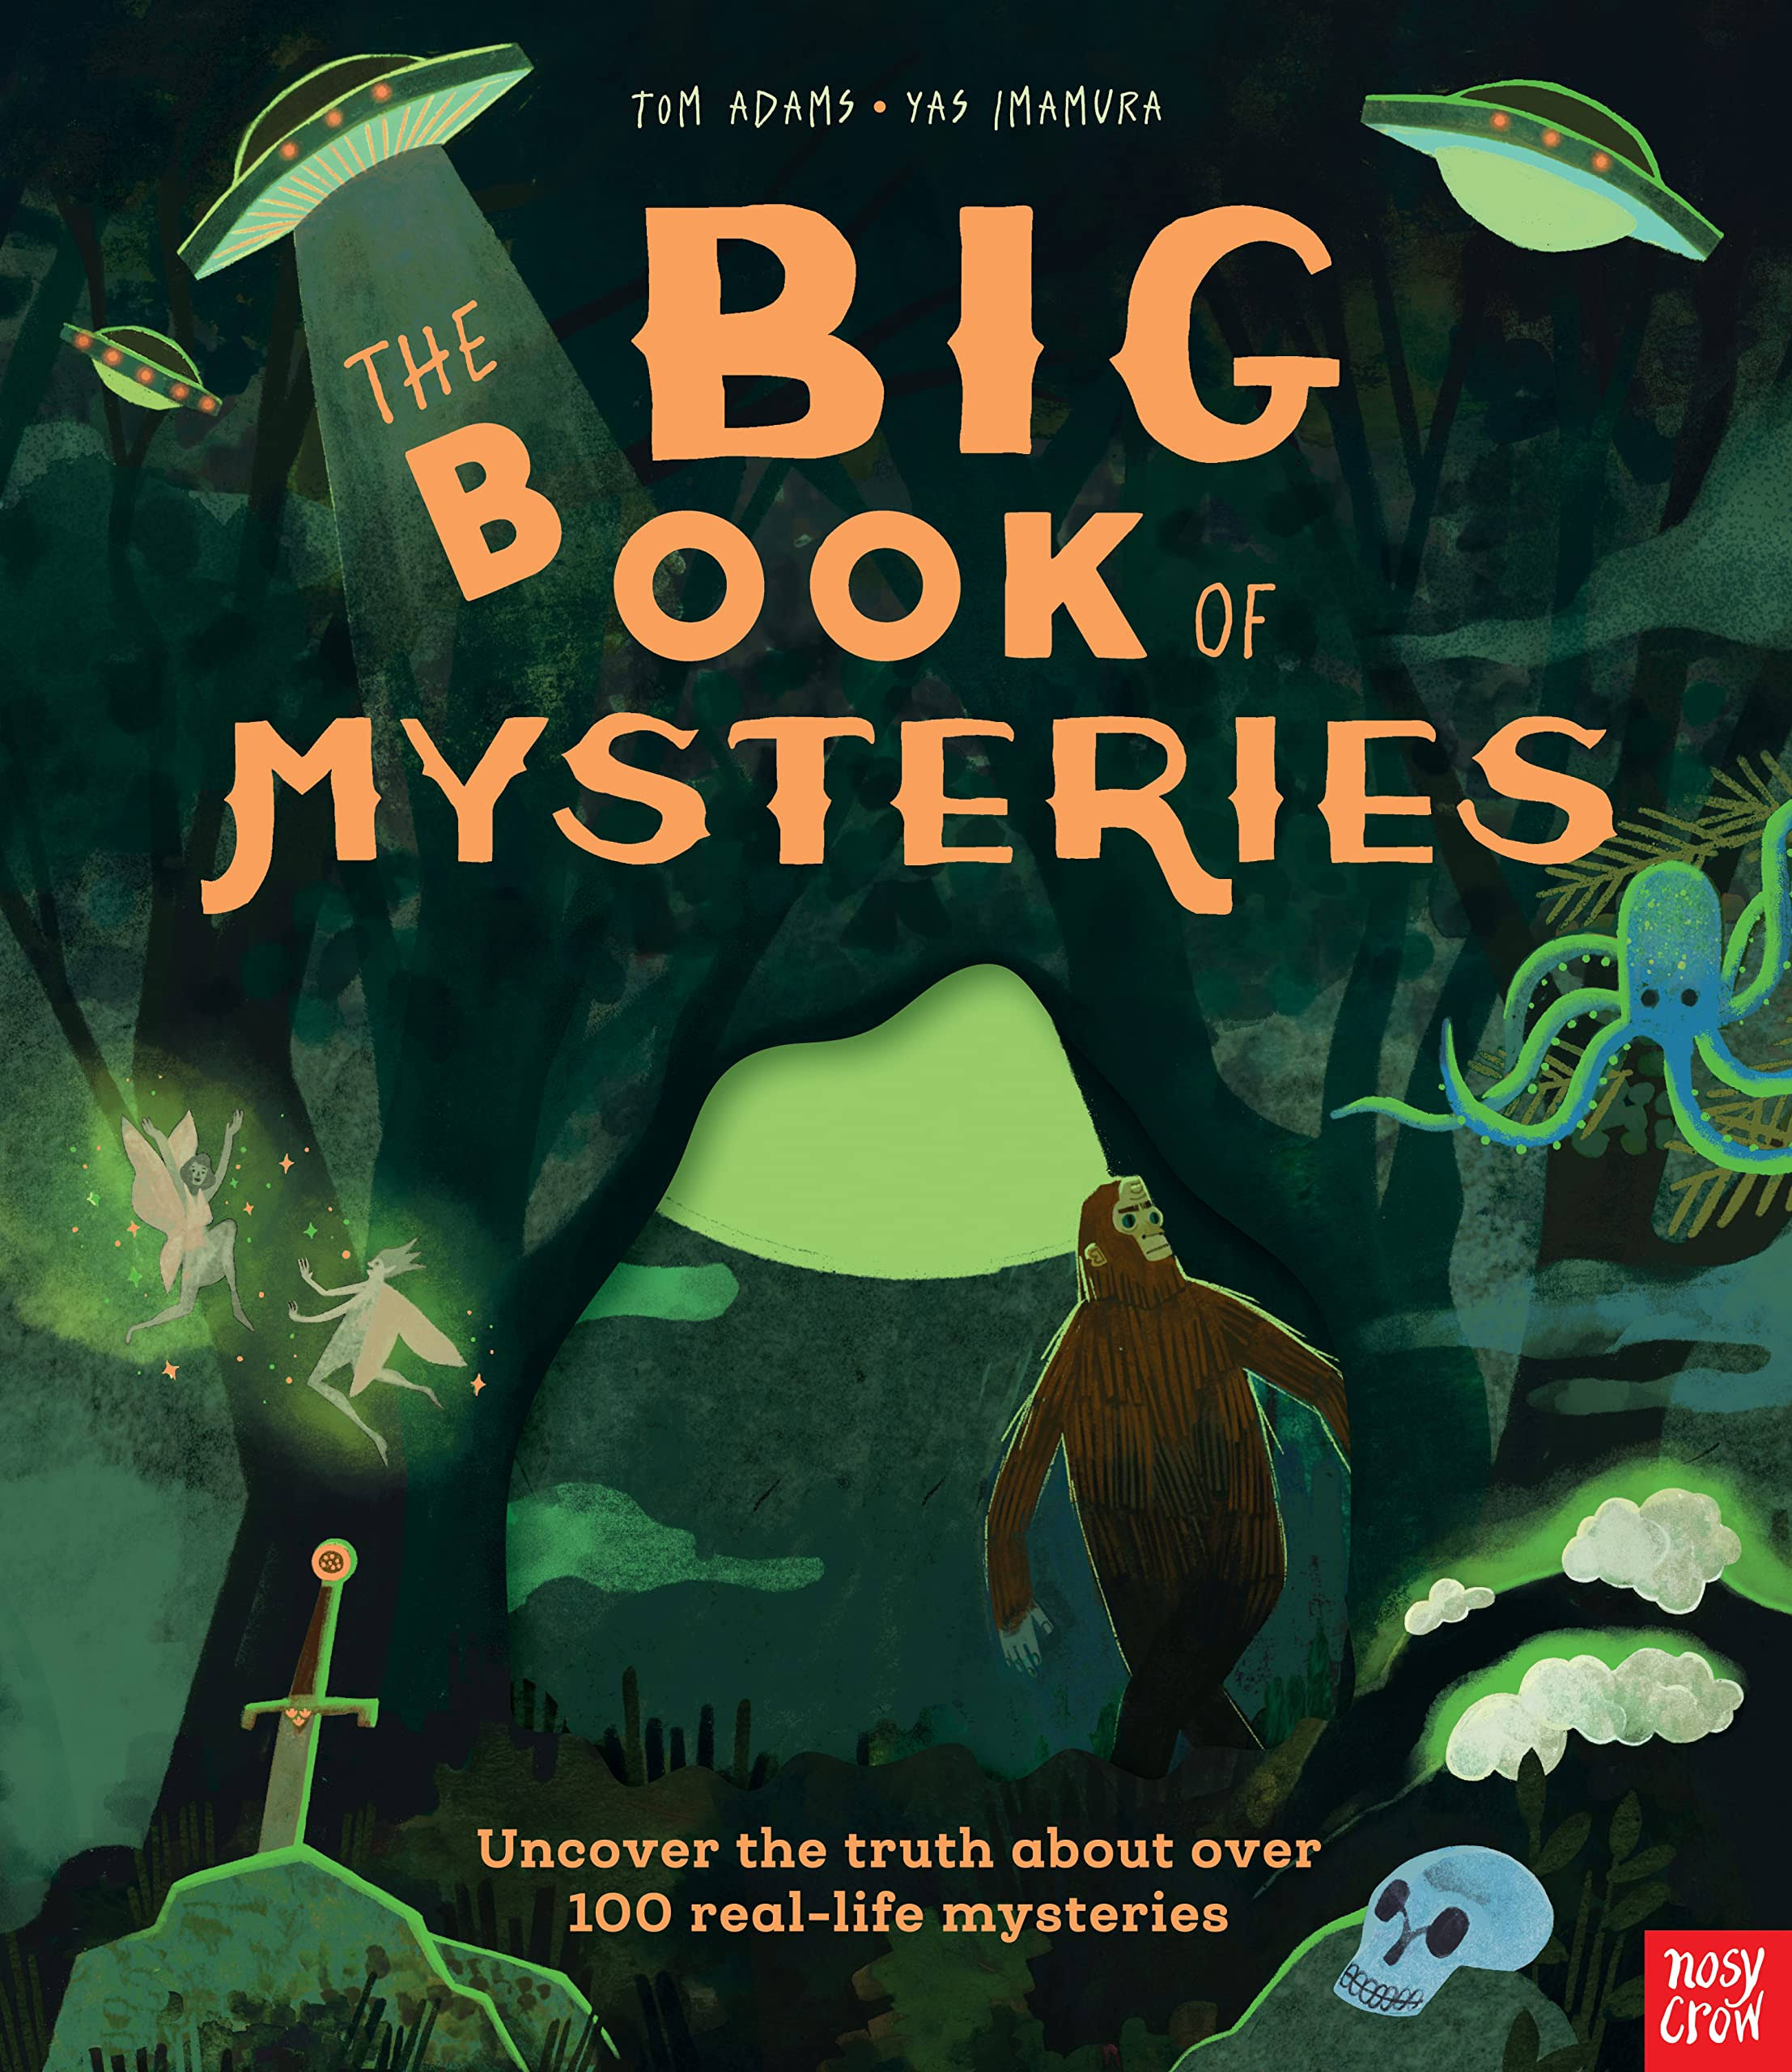 The Big Book of Mysteries by Tom Adams